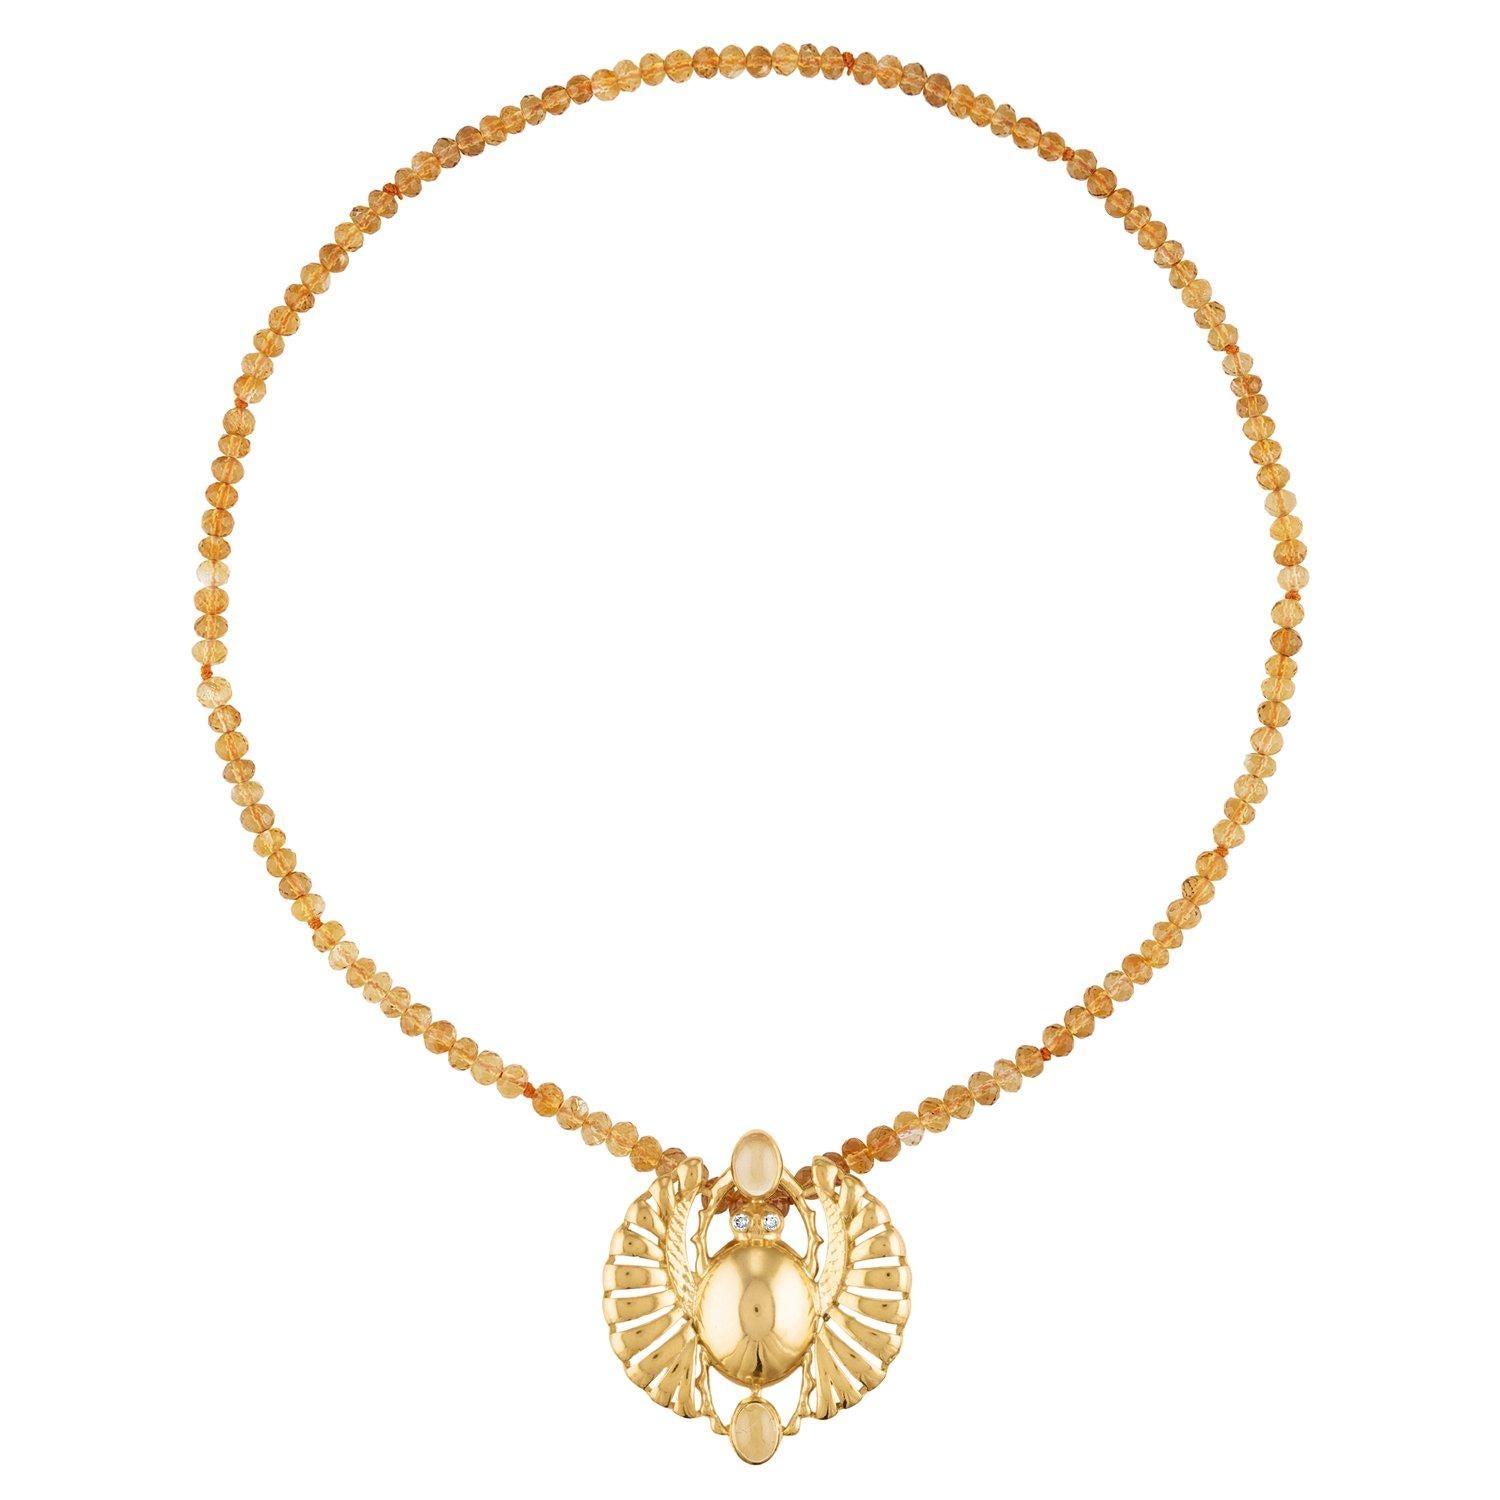 This necklace in precious metals and semiprecious stones is a timeless statement with the open winged scarab pendant. The pendant comes in yellow gold vermeil and Sterling silver. Its all-around stones feature vivid color colors with cabernet red